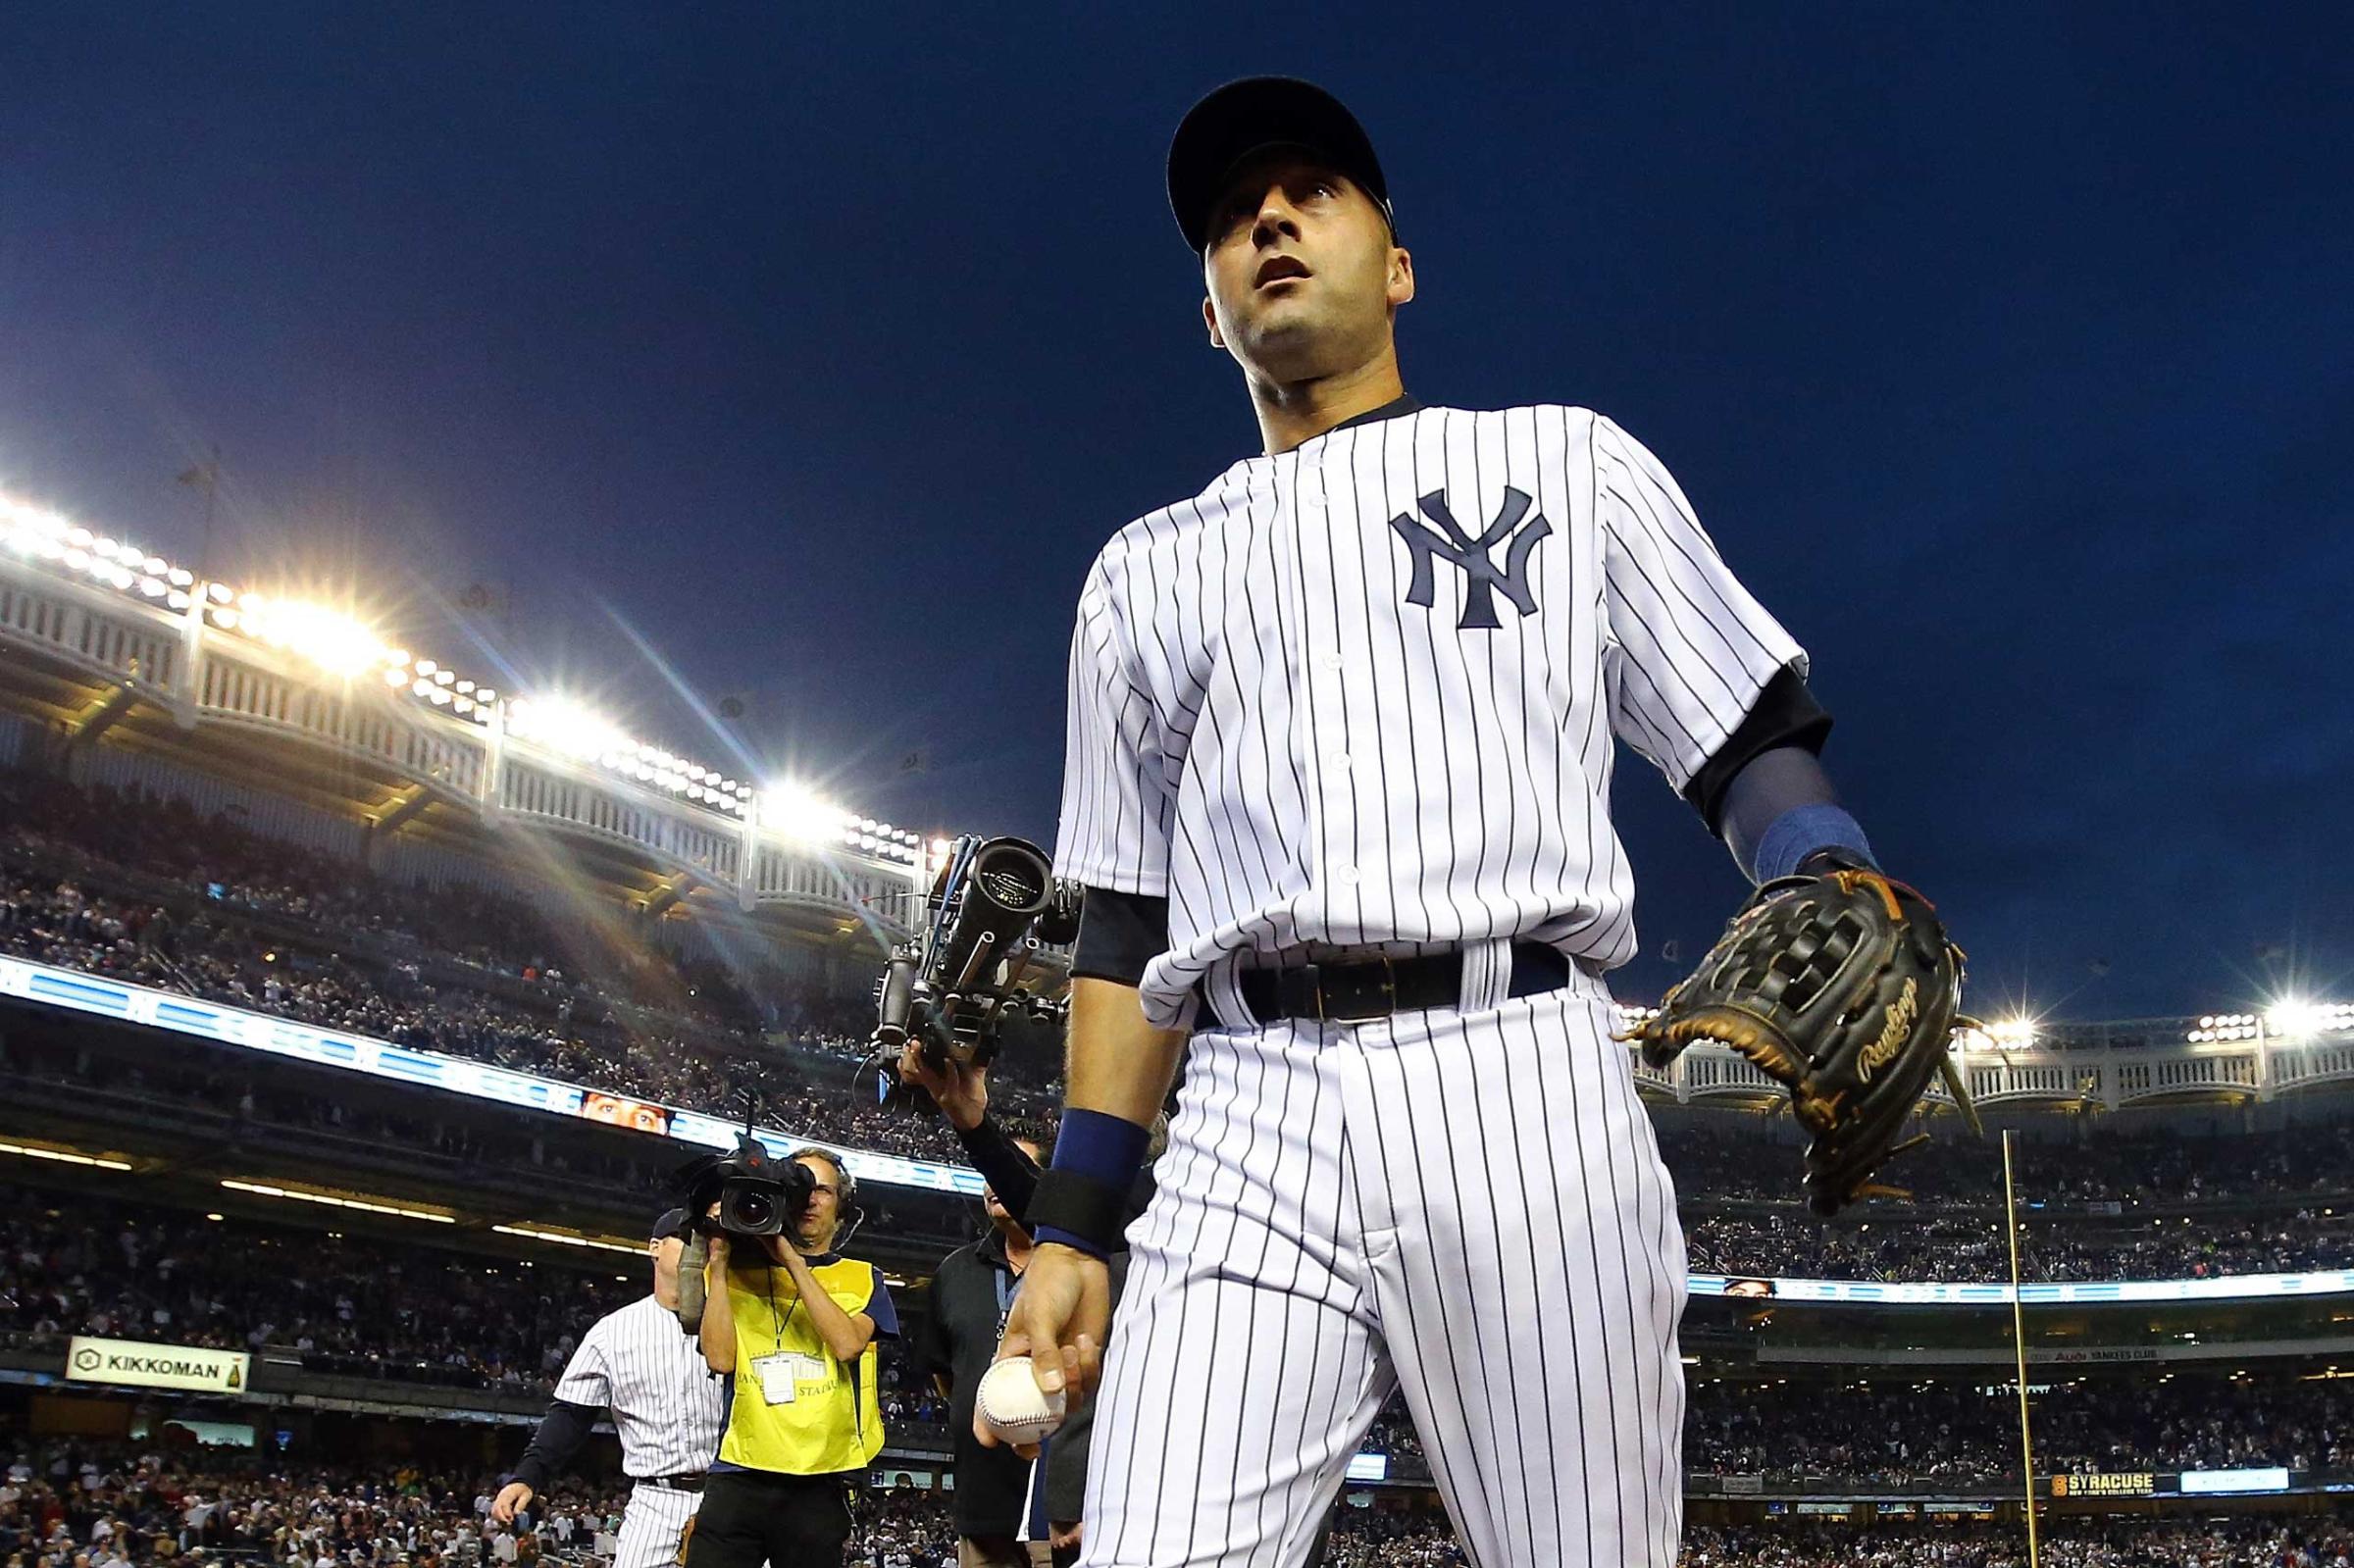 Derek Jeter of the New York Yankees walks into the dugout against the Baltimore Orioles at Yankee Stadium on Sept. 25, 2014.